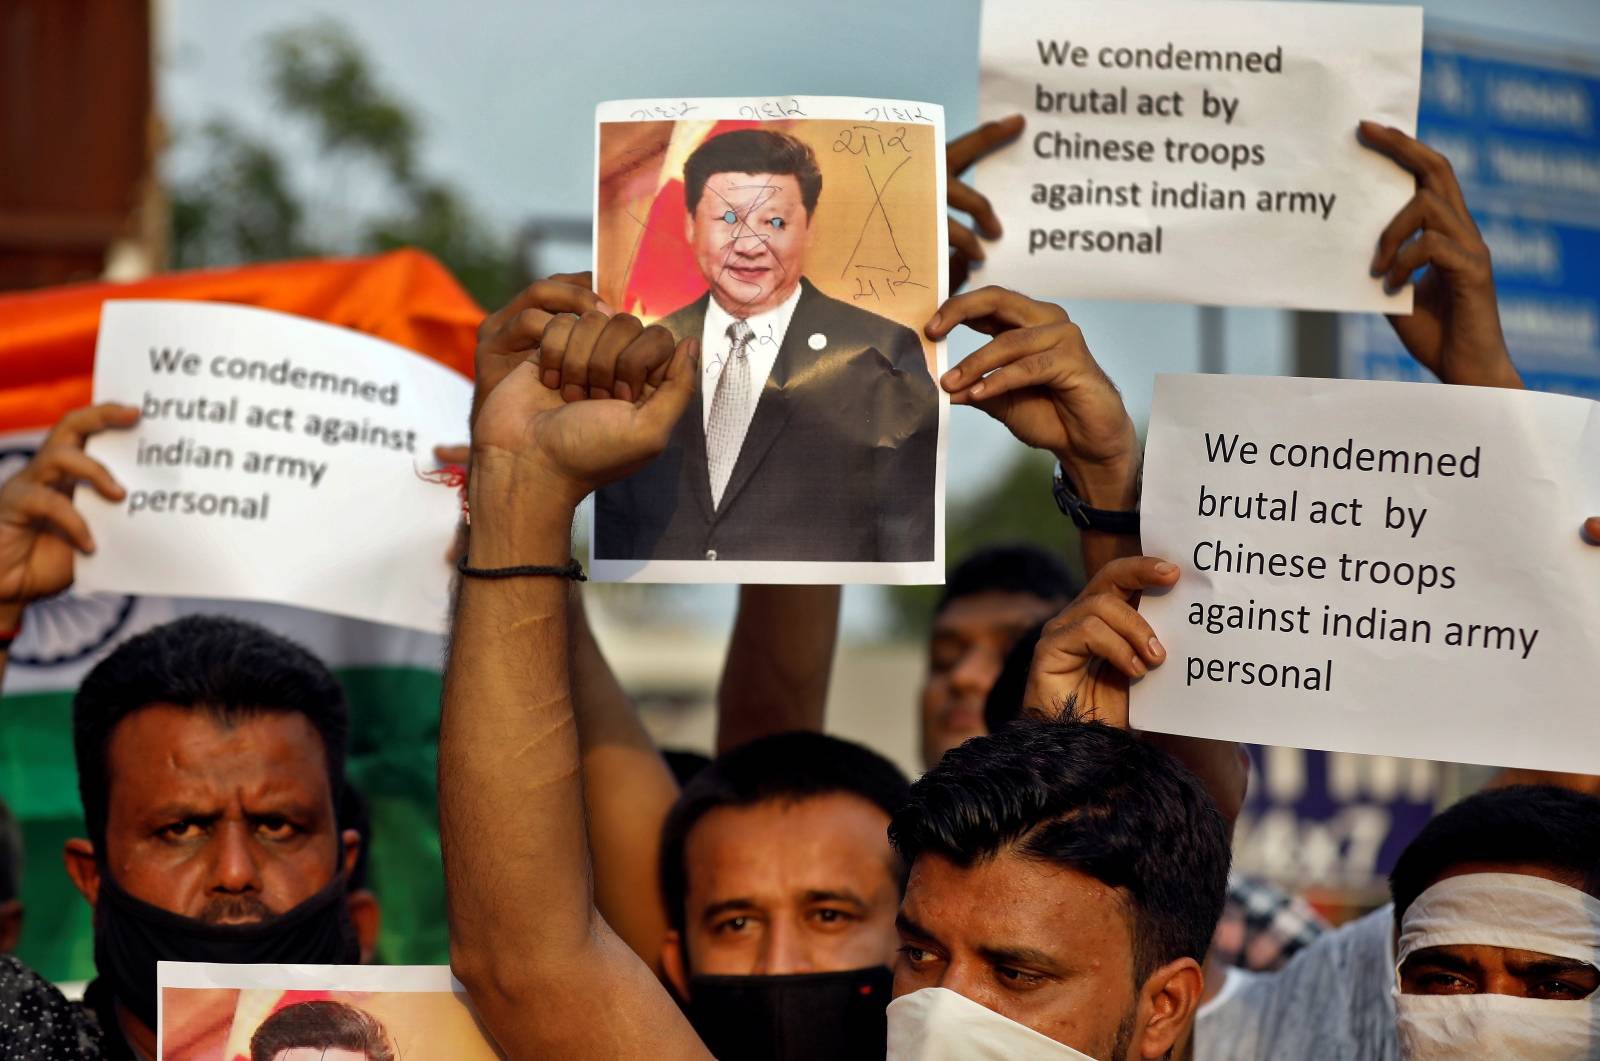 Demonstrators hold placards and a defaced poster of Chinese President Xi Jinping as they shout slogans during a protest against China, in Ahmedabad